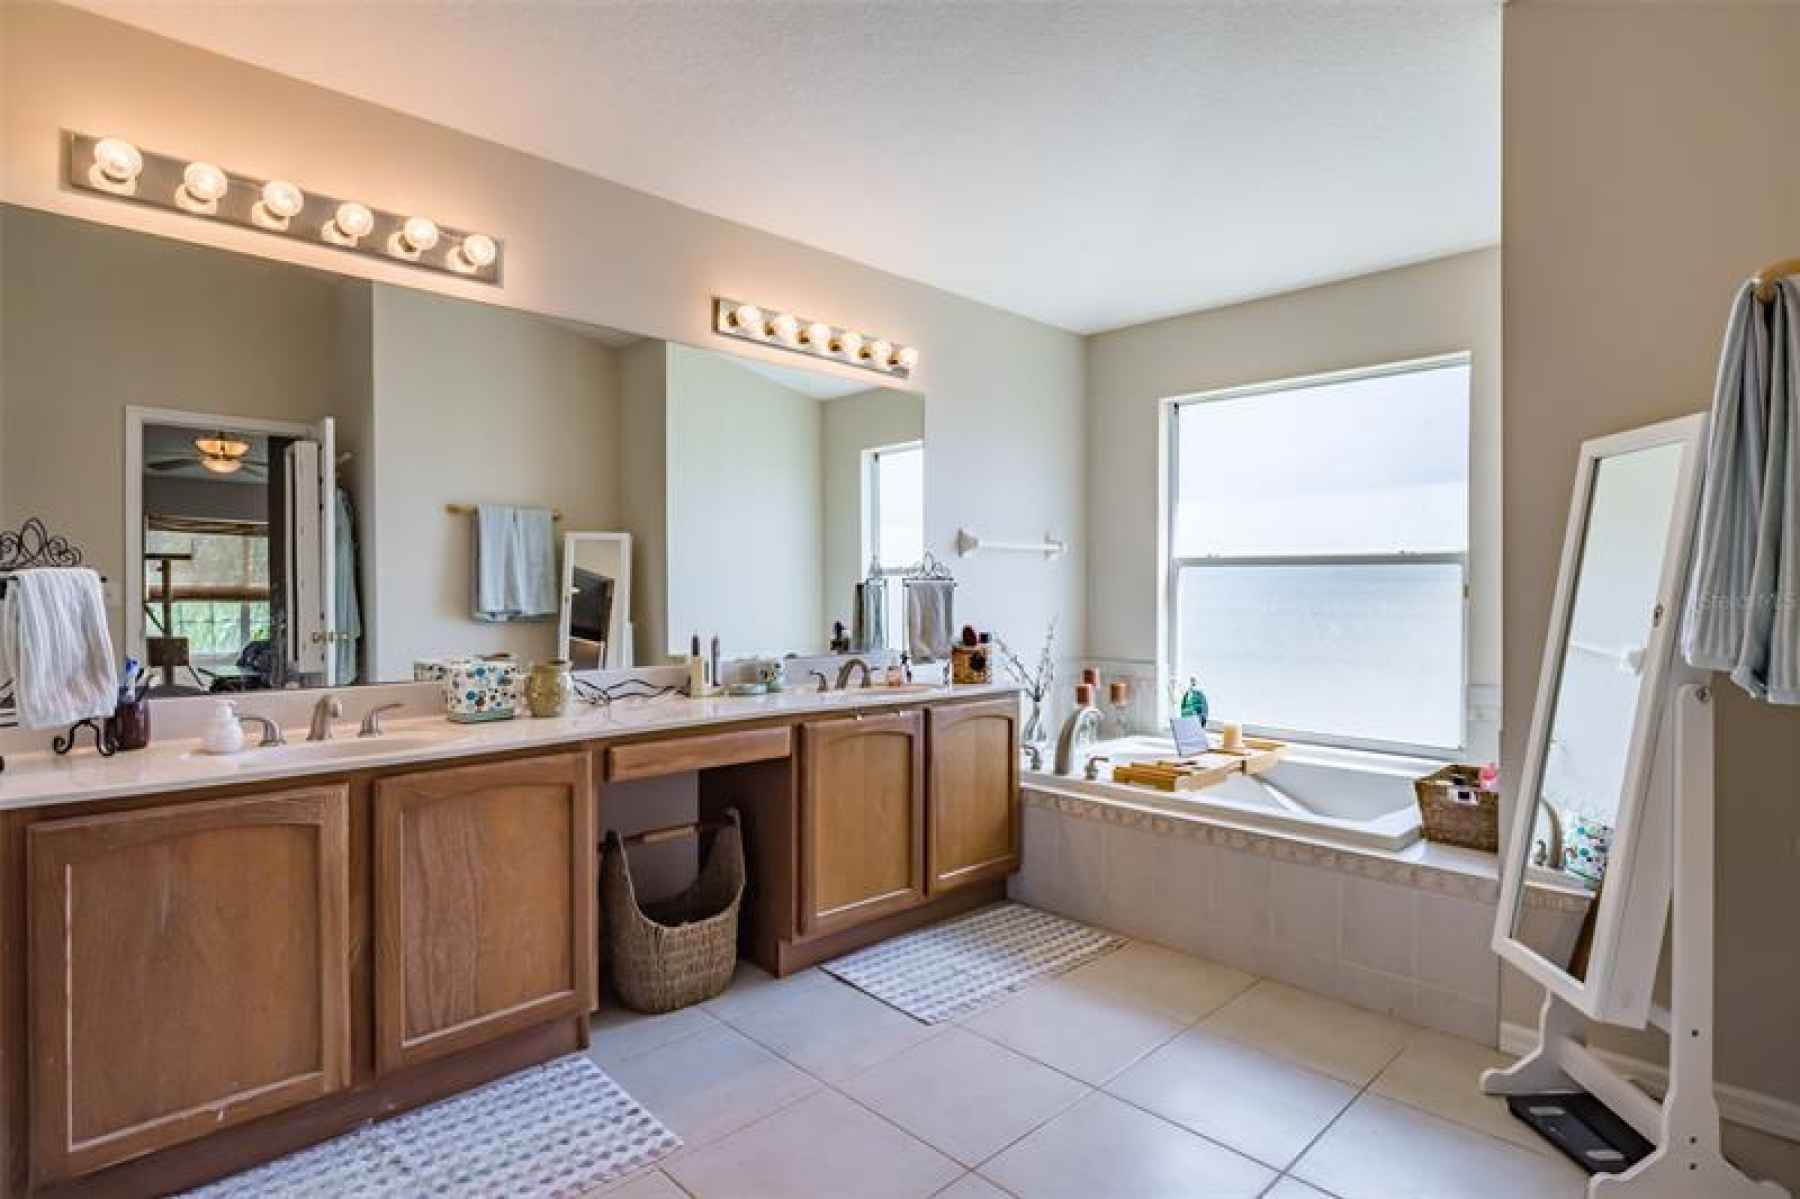 Dual sinks and vanity in master bath